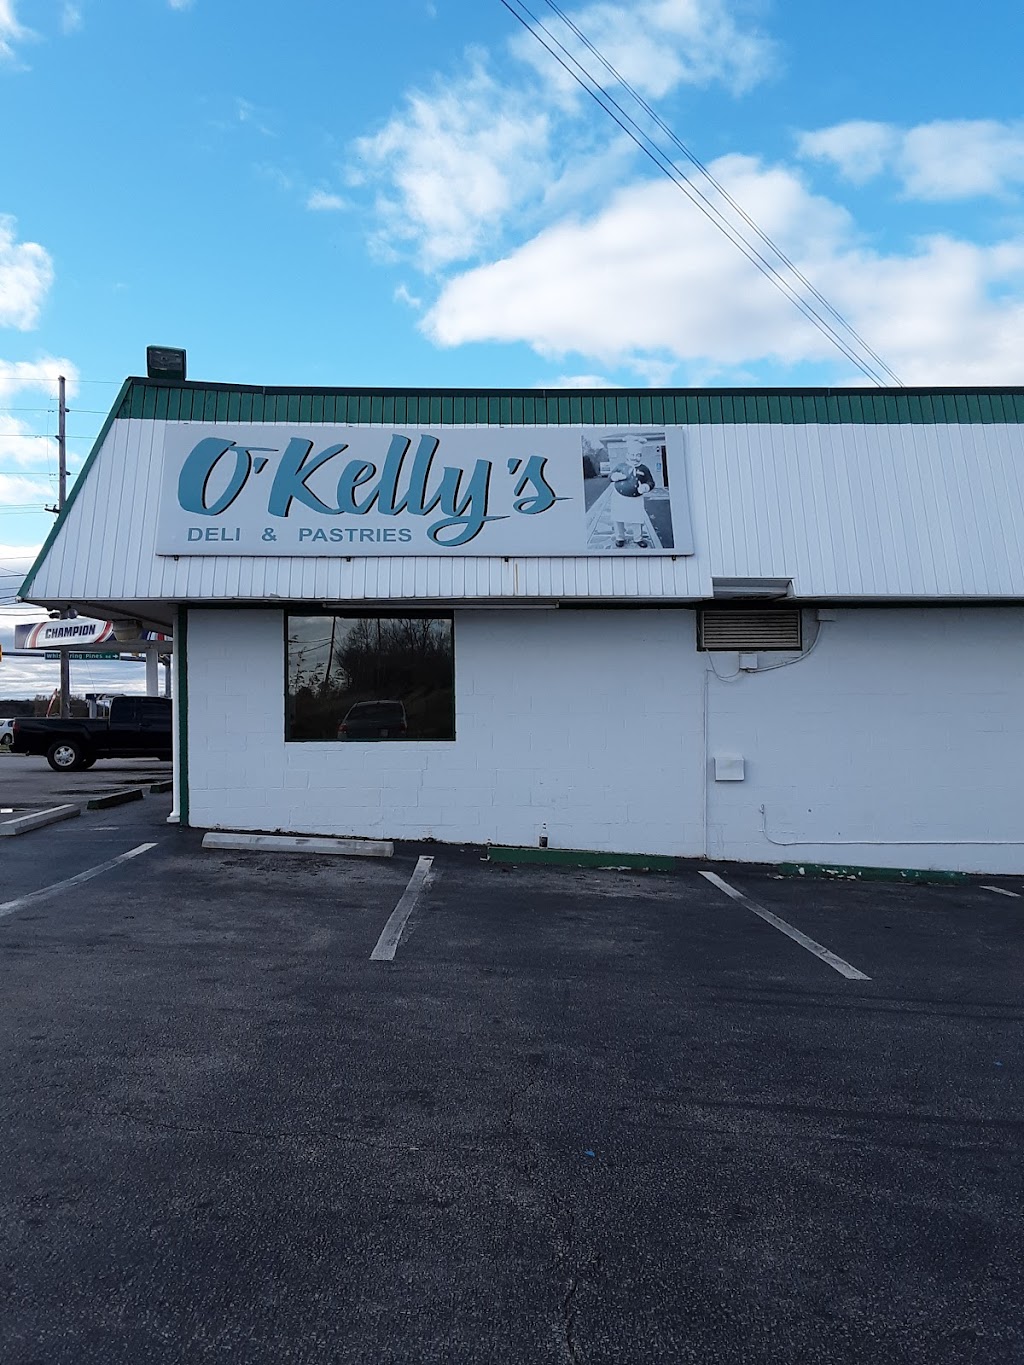 Okellys express deli and pastries | 12288 Martinsville Hwy, Danville, VA 24541, USA | Phone: (434) 822-3873